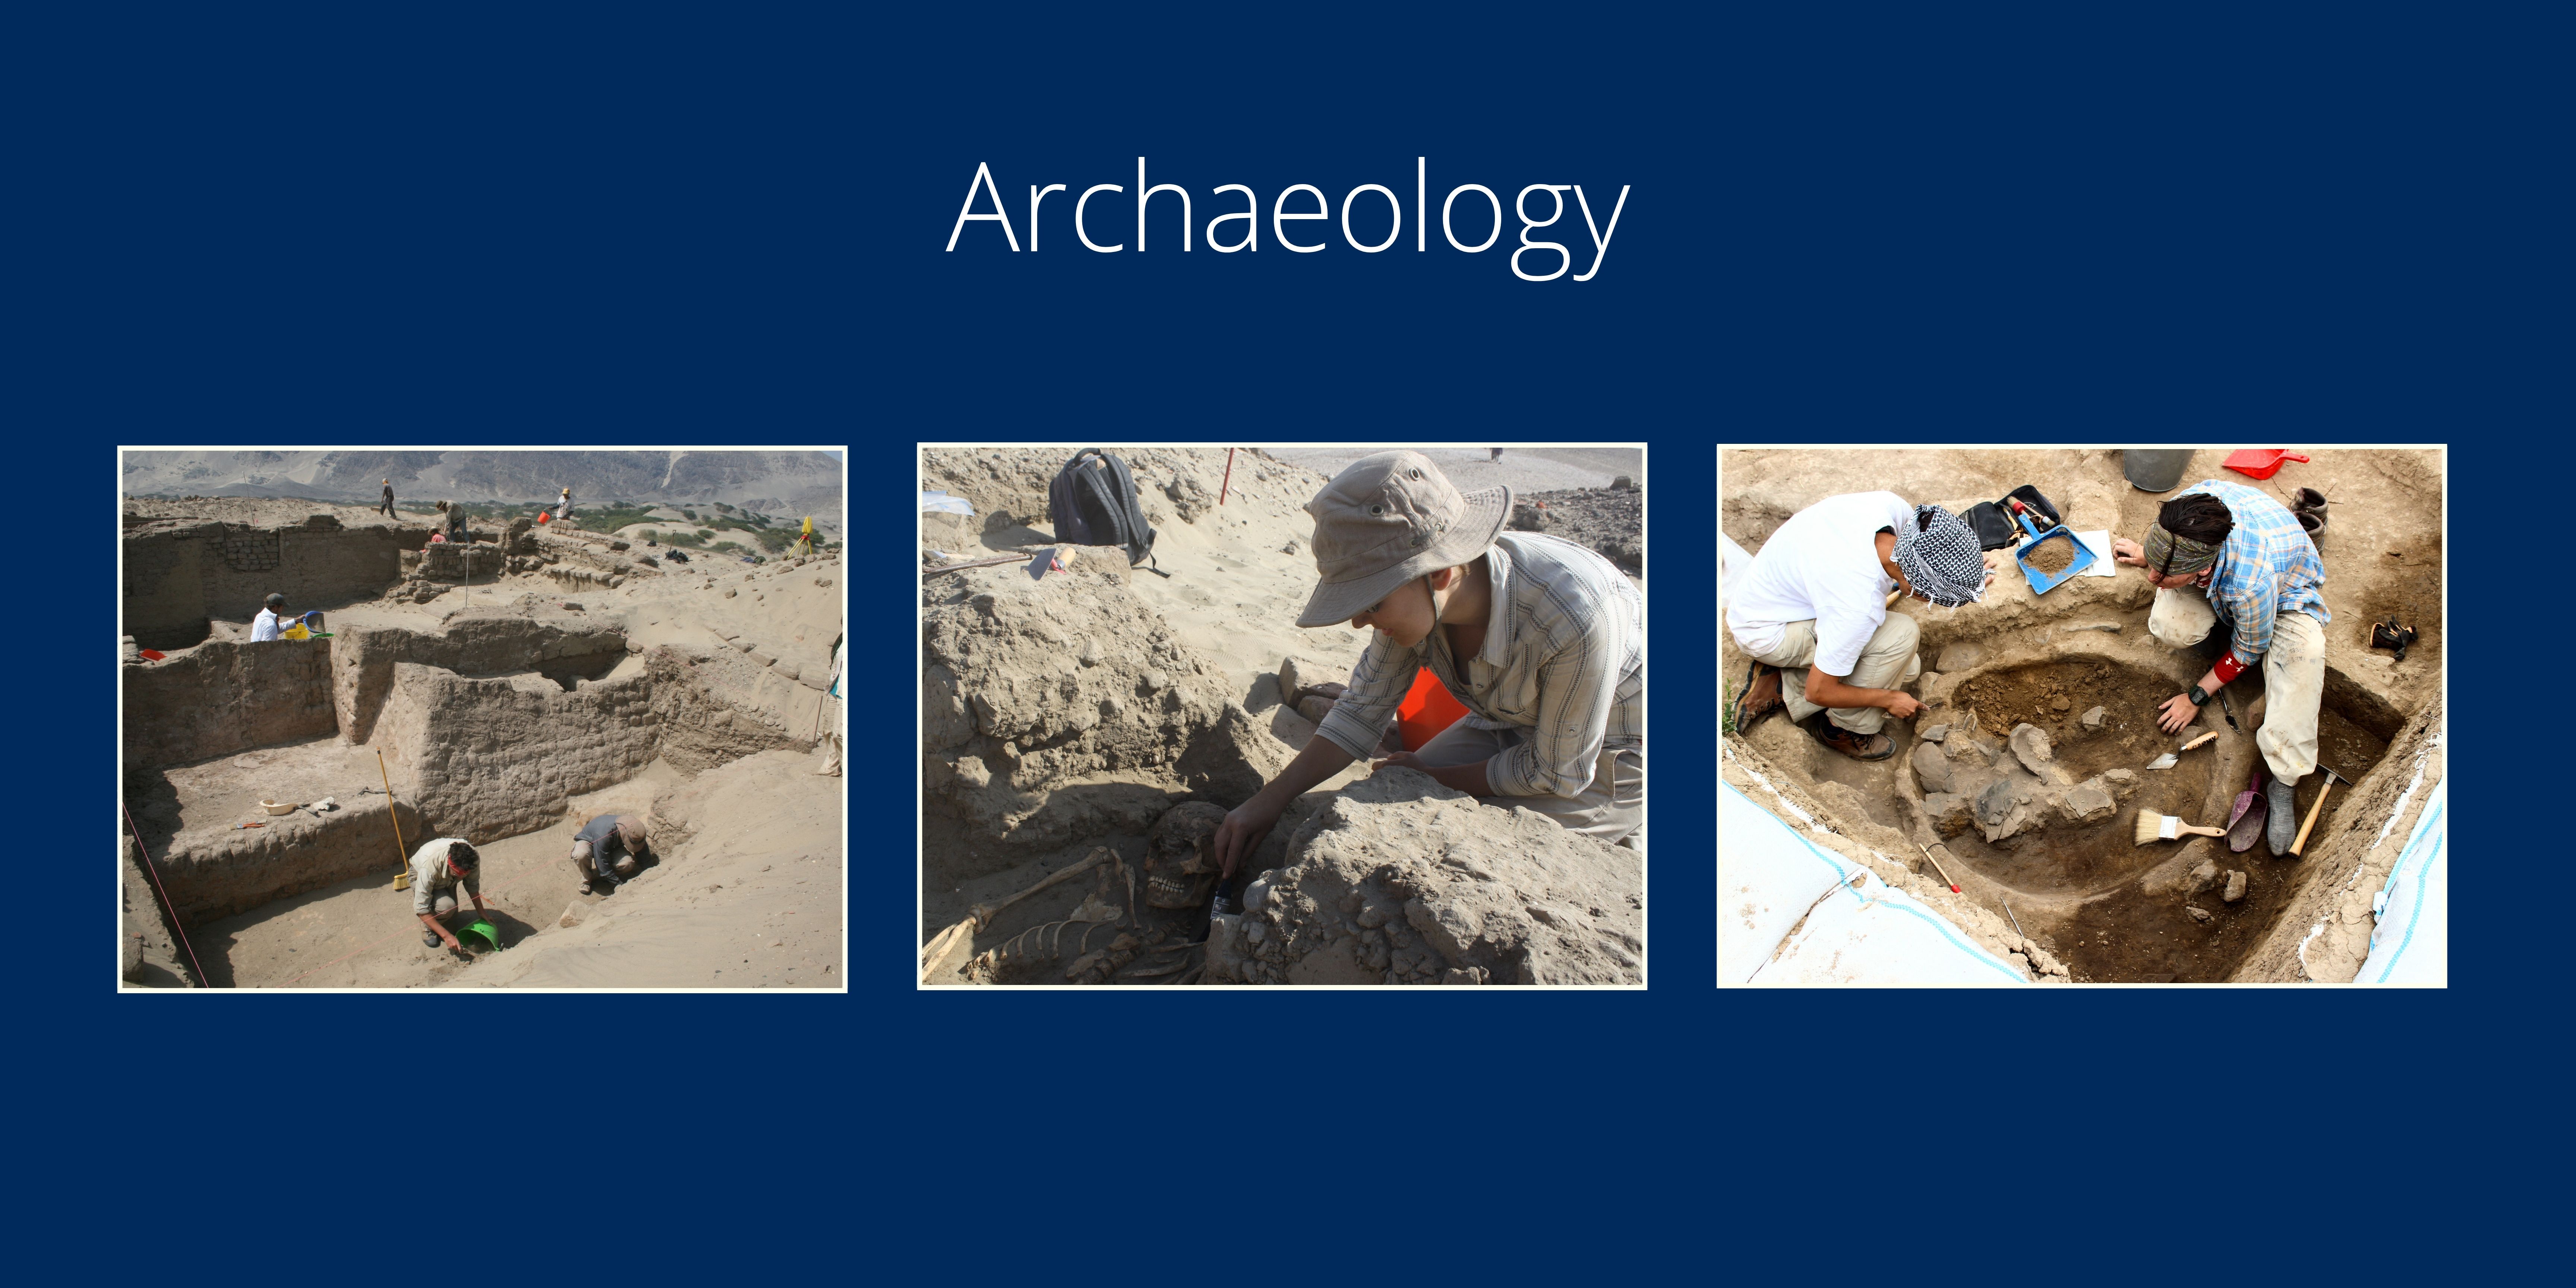 Three images: One of a dig site where researchers search the sand, another of a archaeologist uncovering a skeleton in the sand, and a third of two people talking at a dig site.